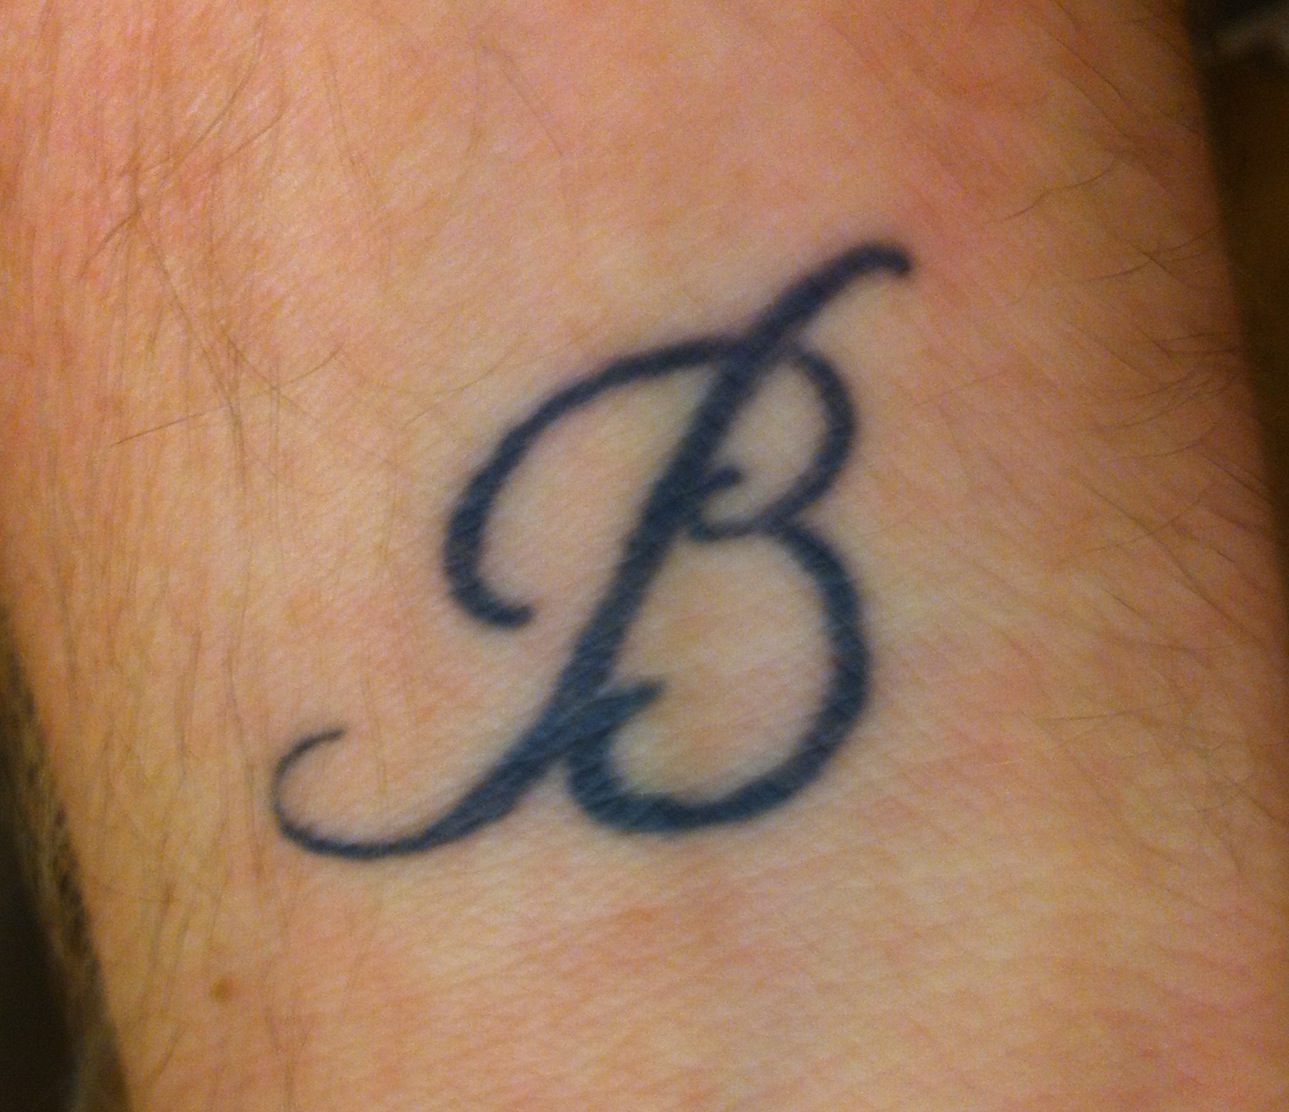 70+ Letter B Tattoo Designs, Ideas and Templates - Tattoo Me Now